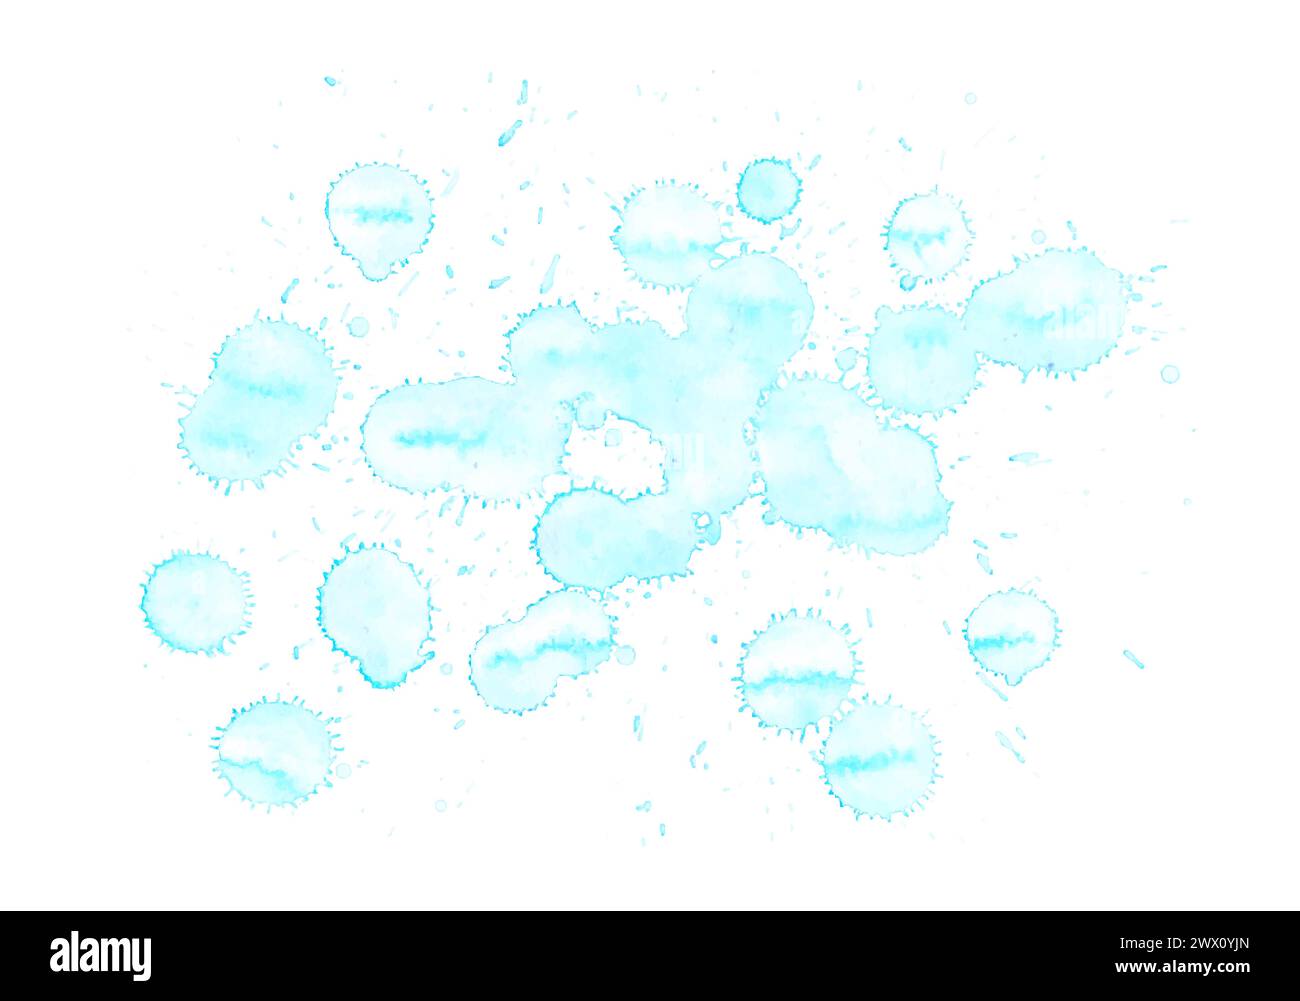 Blue Watercolor Painted, Vector Illustration Stock Vector